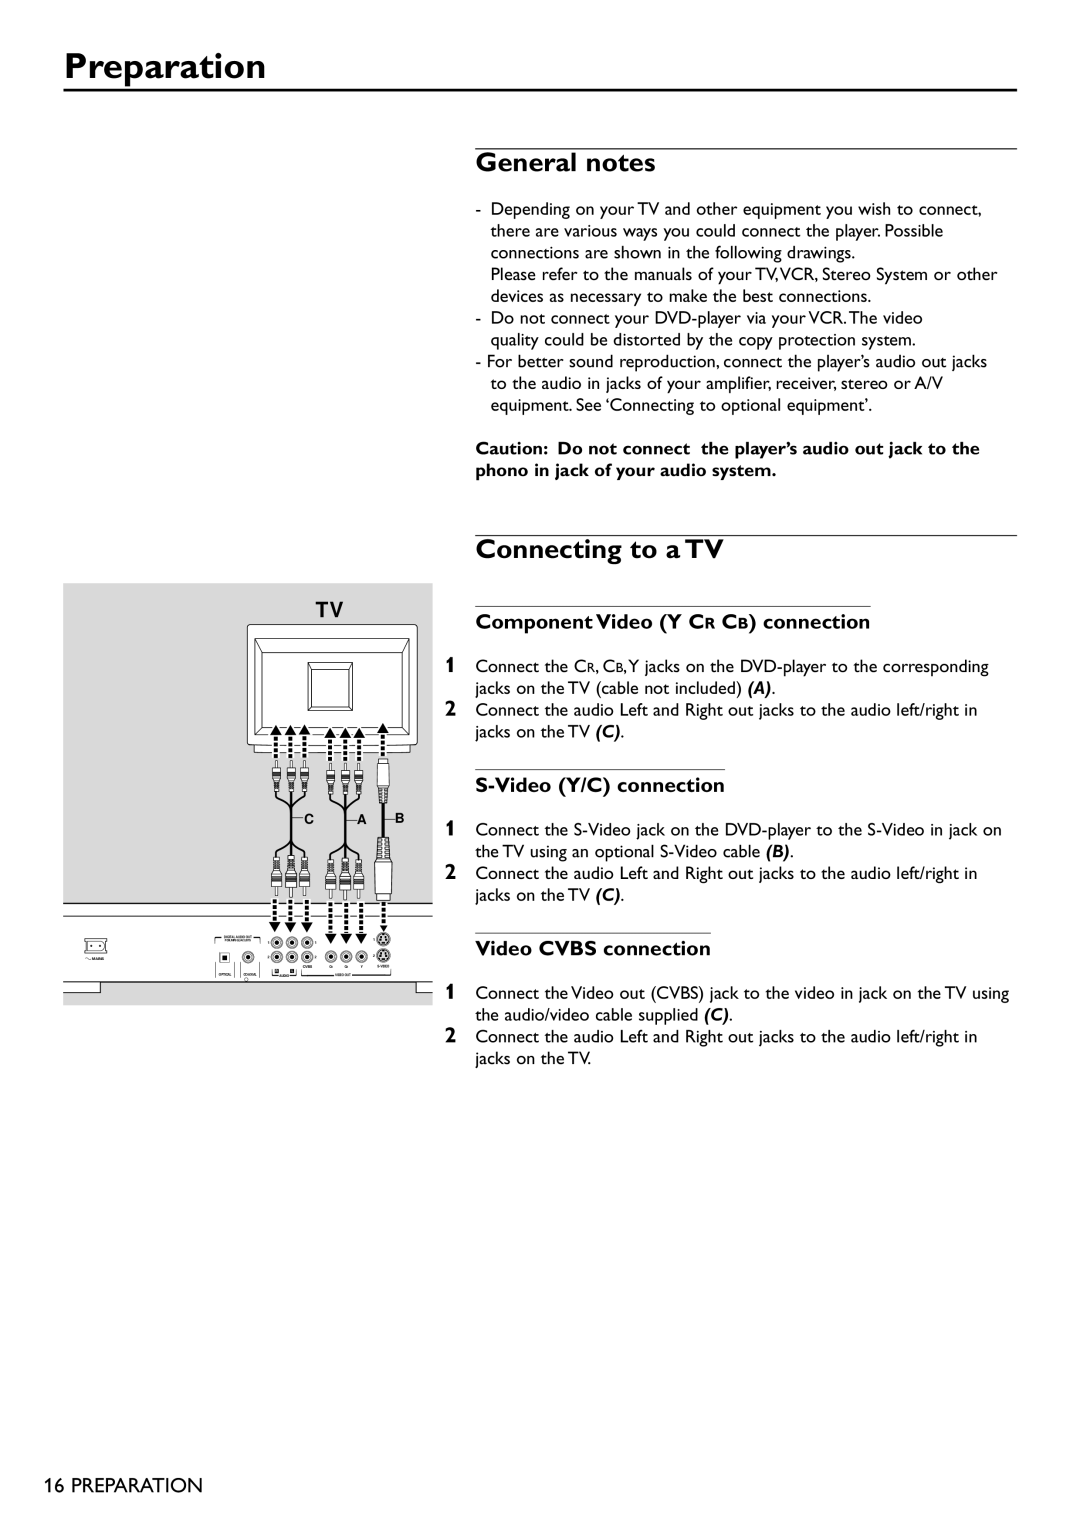 Philips DVD751 manual Preparation, General notes, Connecting to a TV 